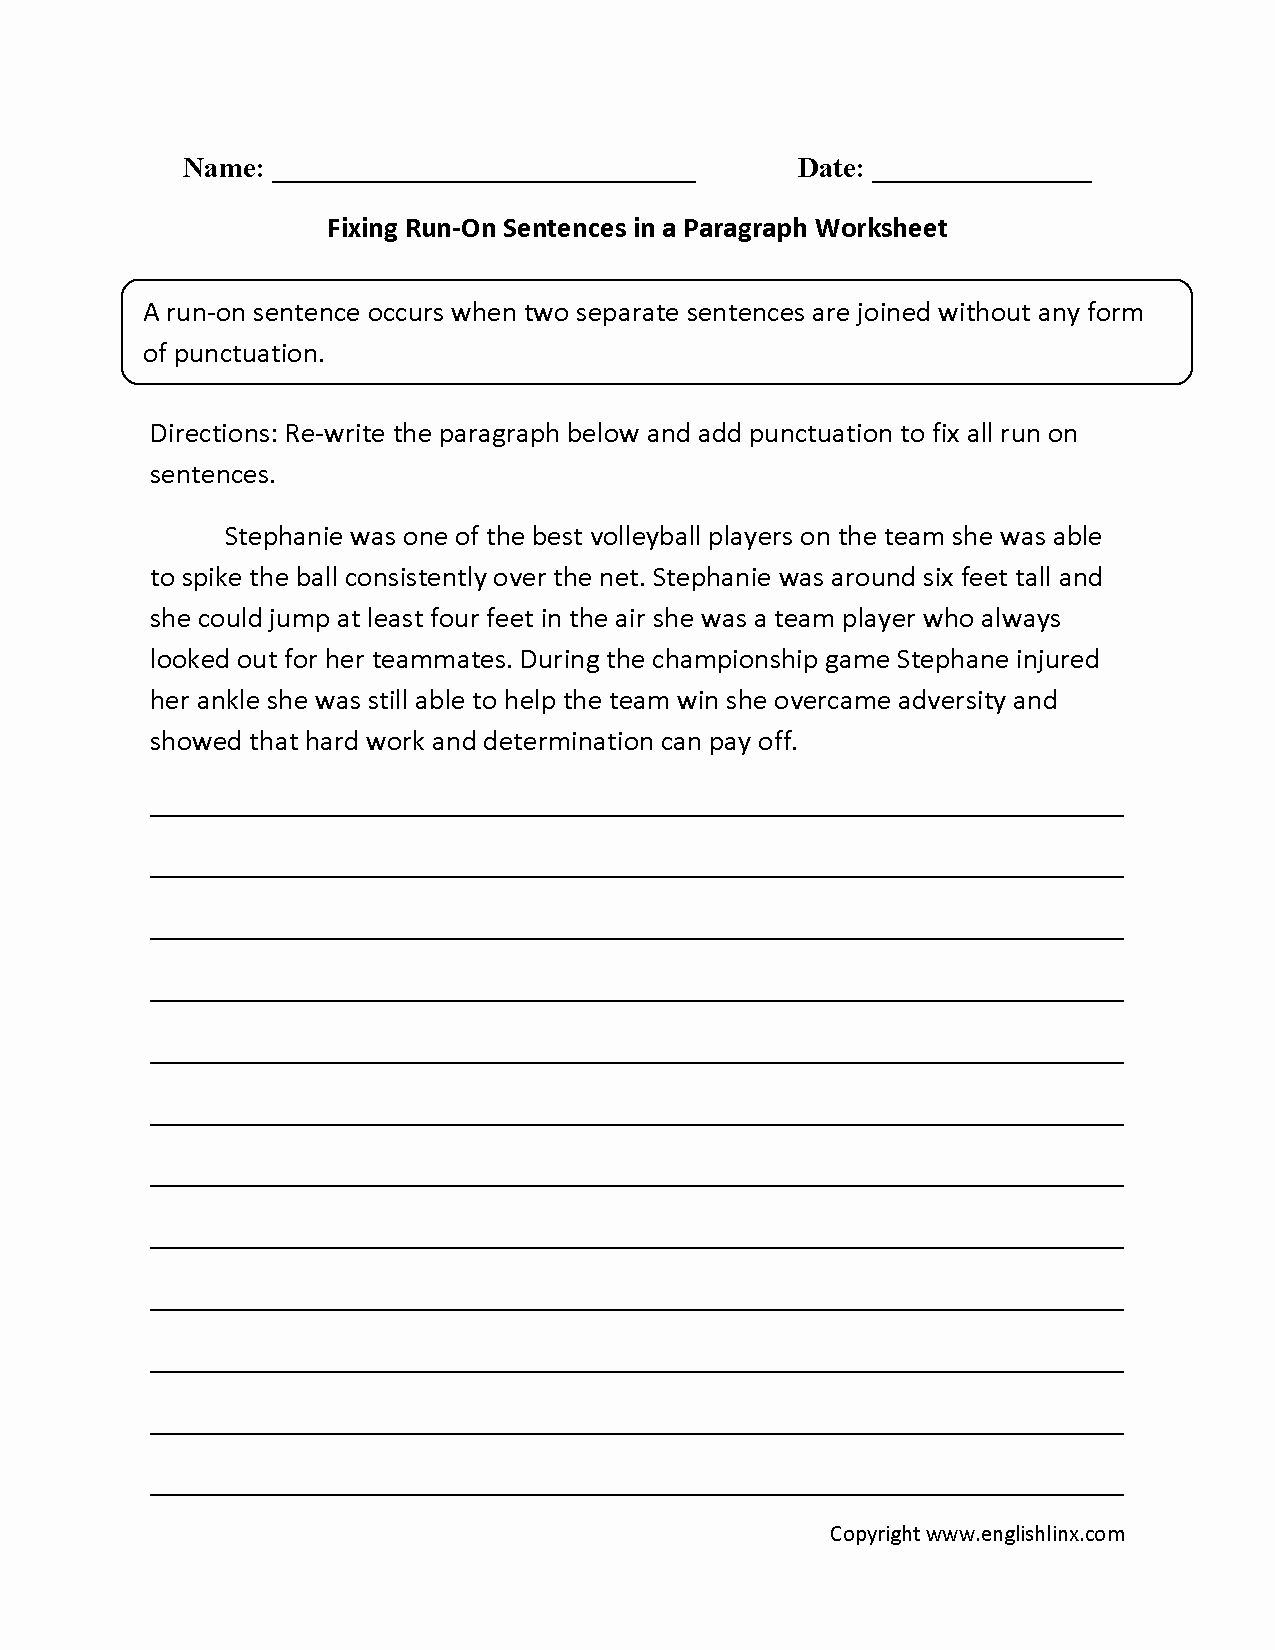 Writing A Paragraph Worksheet Luxury Fixing Paragraphs with Run On Sentences Worksheets